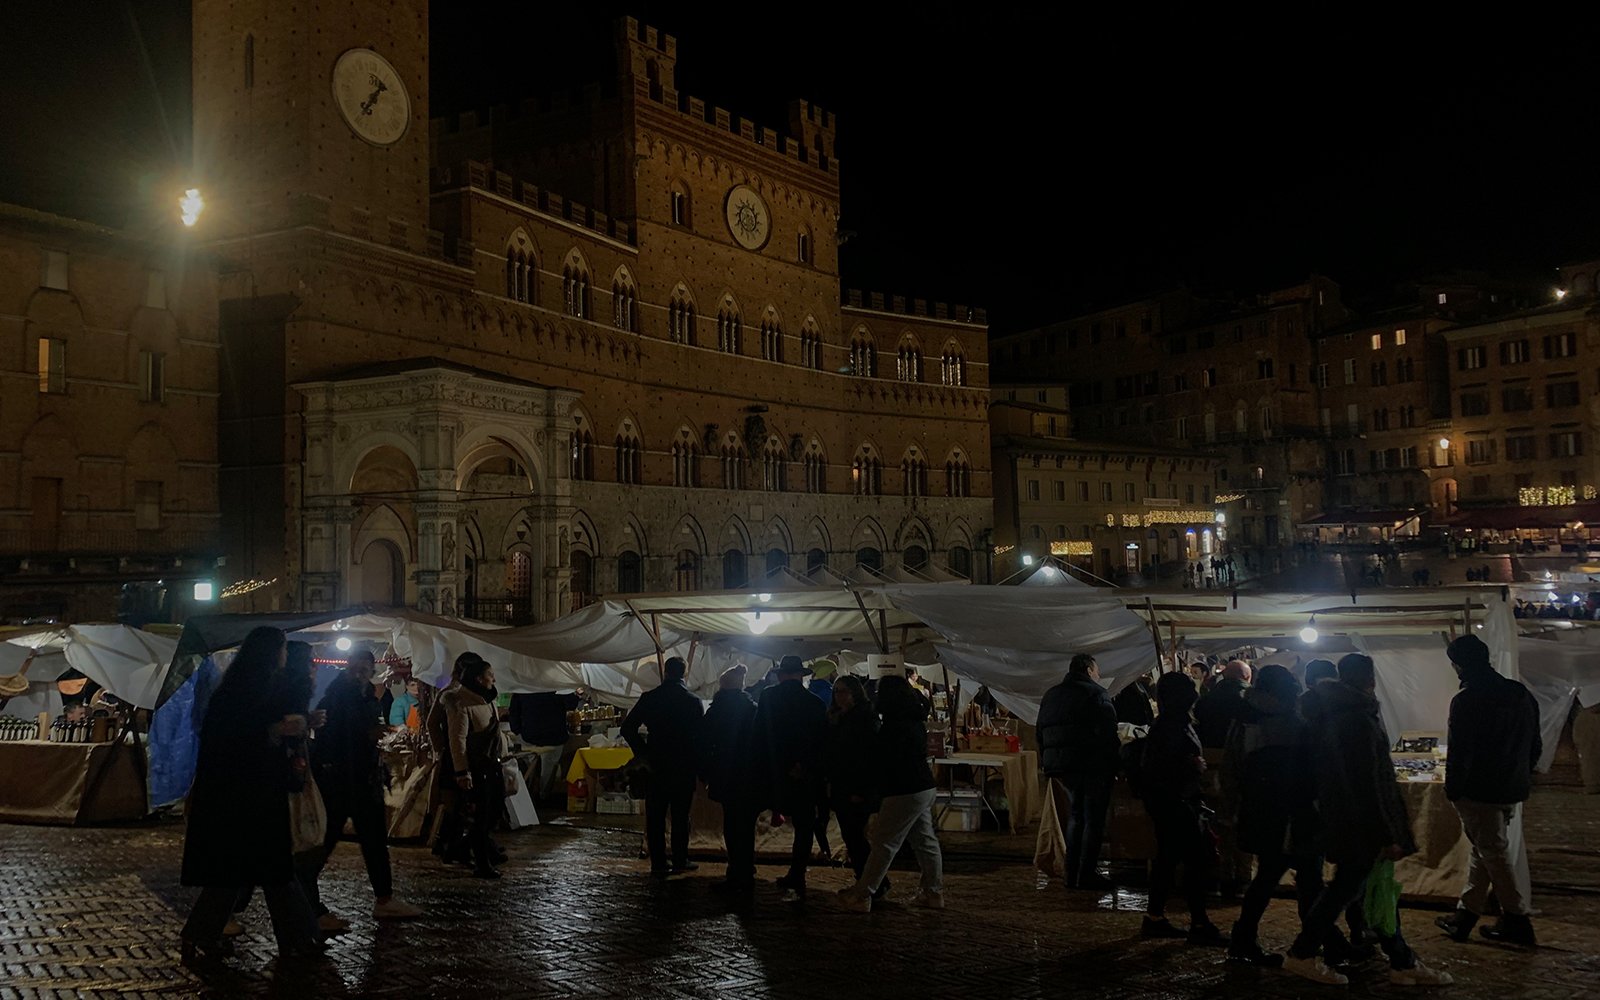 Passersby at nighttime in front of lit outdoor tents for vendors with buildings and clock tower in background 